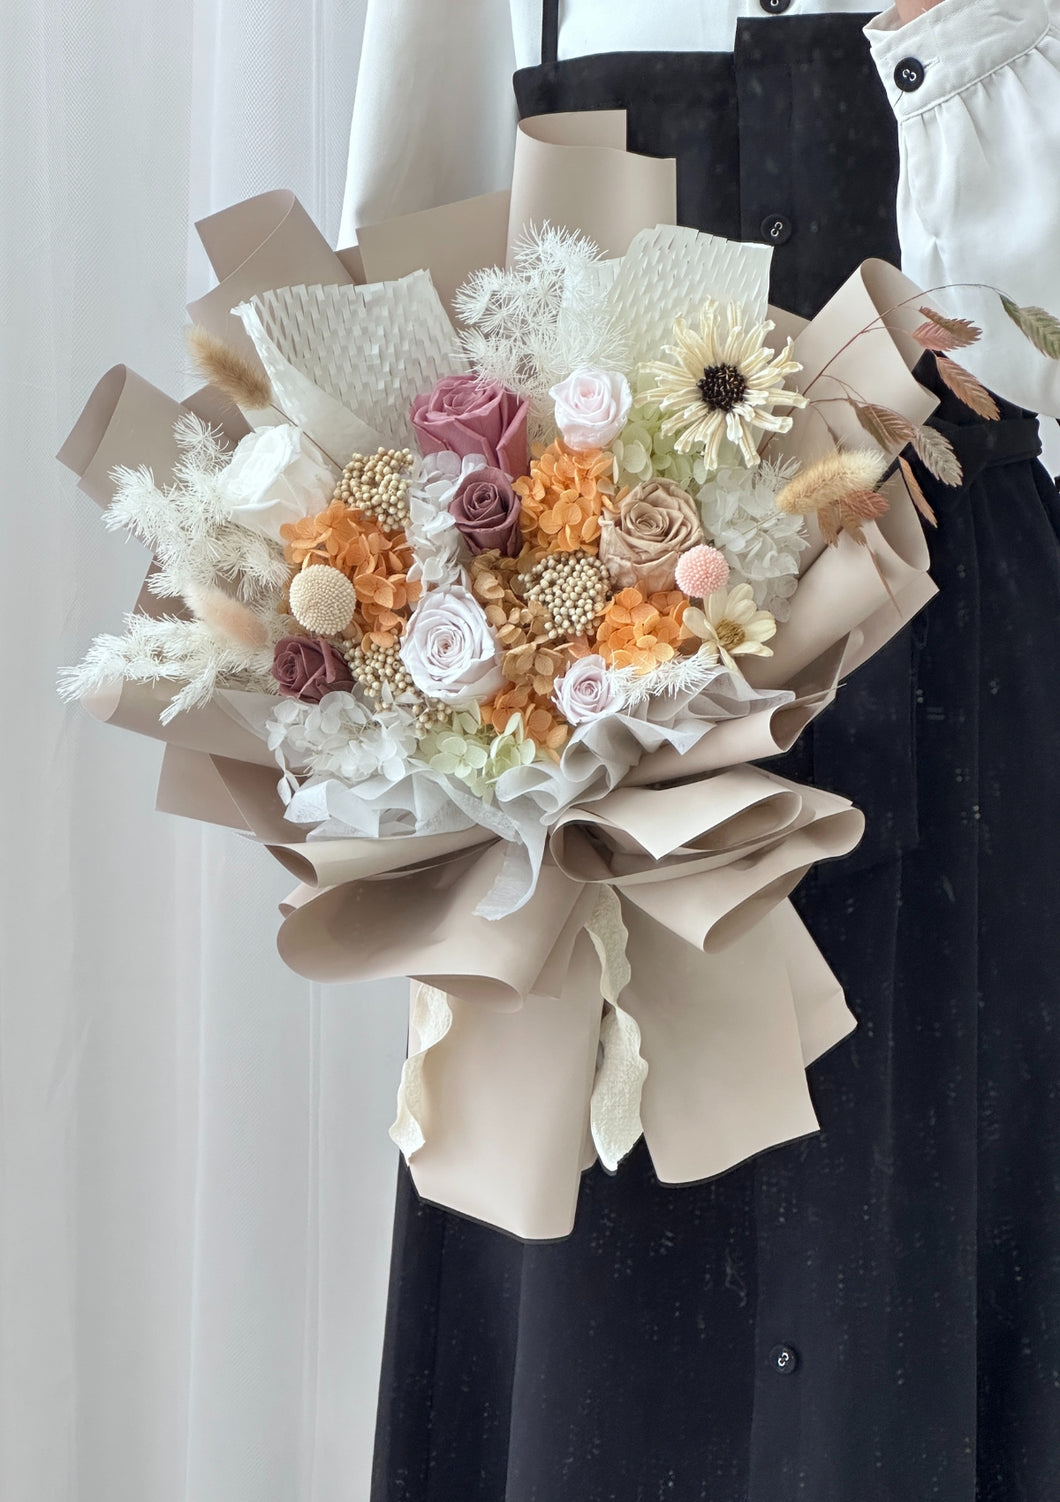 Retro Style Preserved Flower Bouquet 复古风格永生花花束